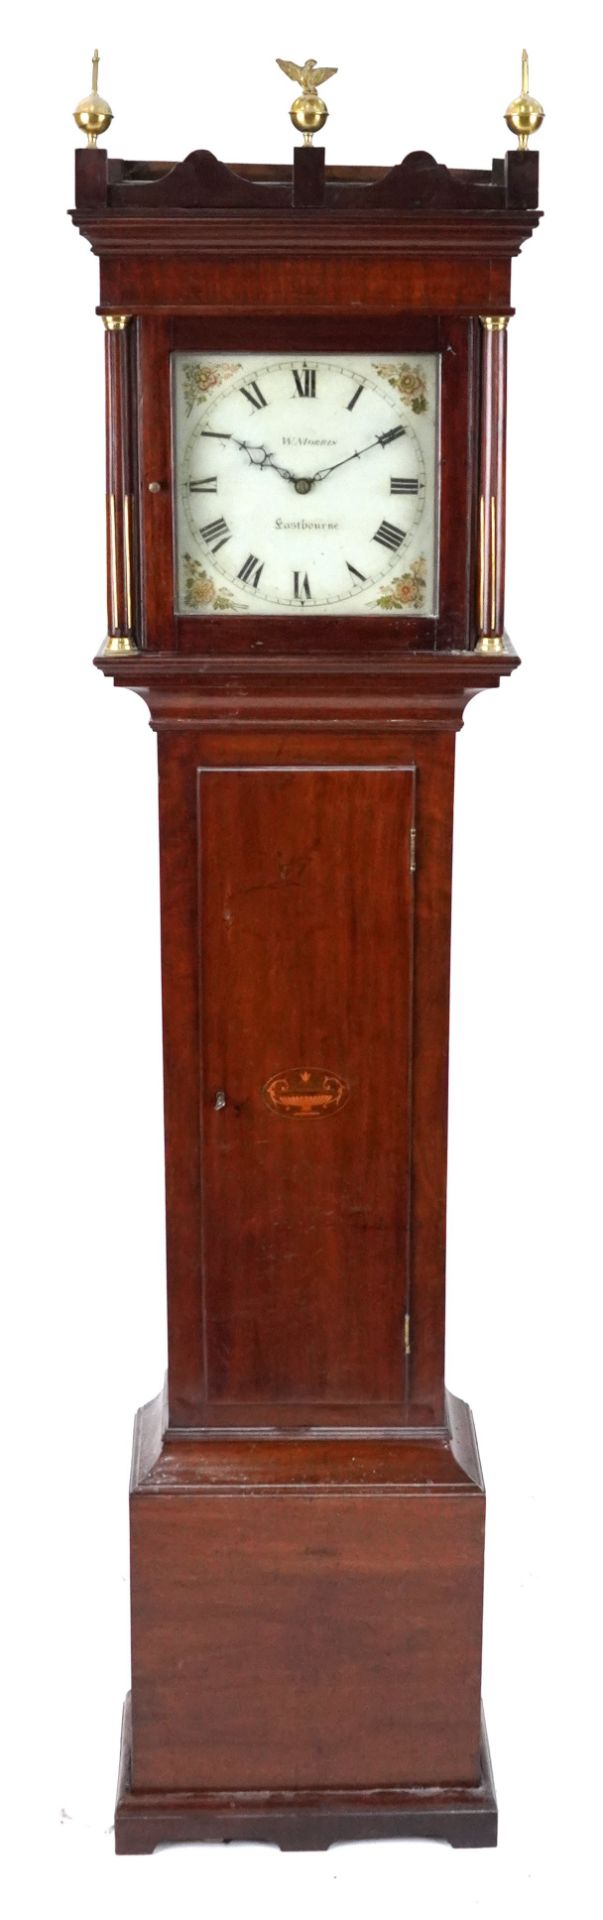 19th century mahogany longcase clock with painted dial inscribed W Morris Eastbourne having Roman